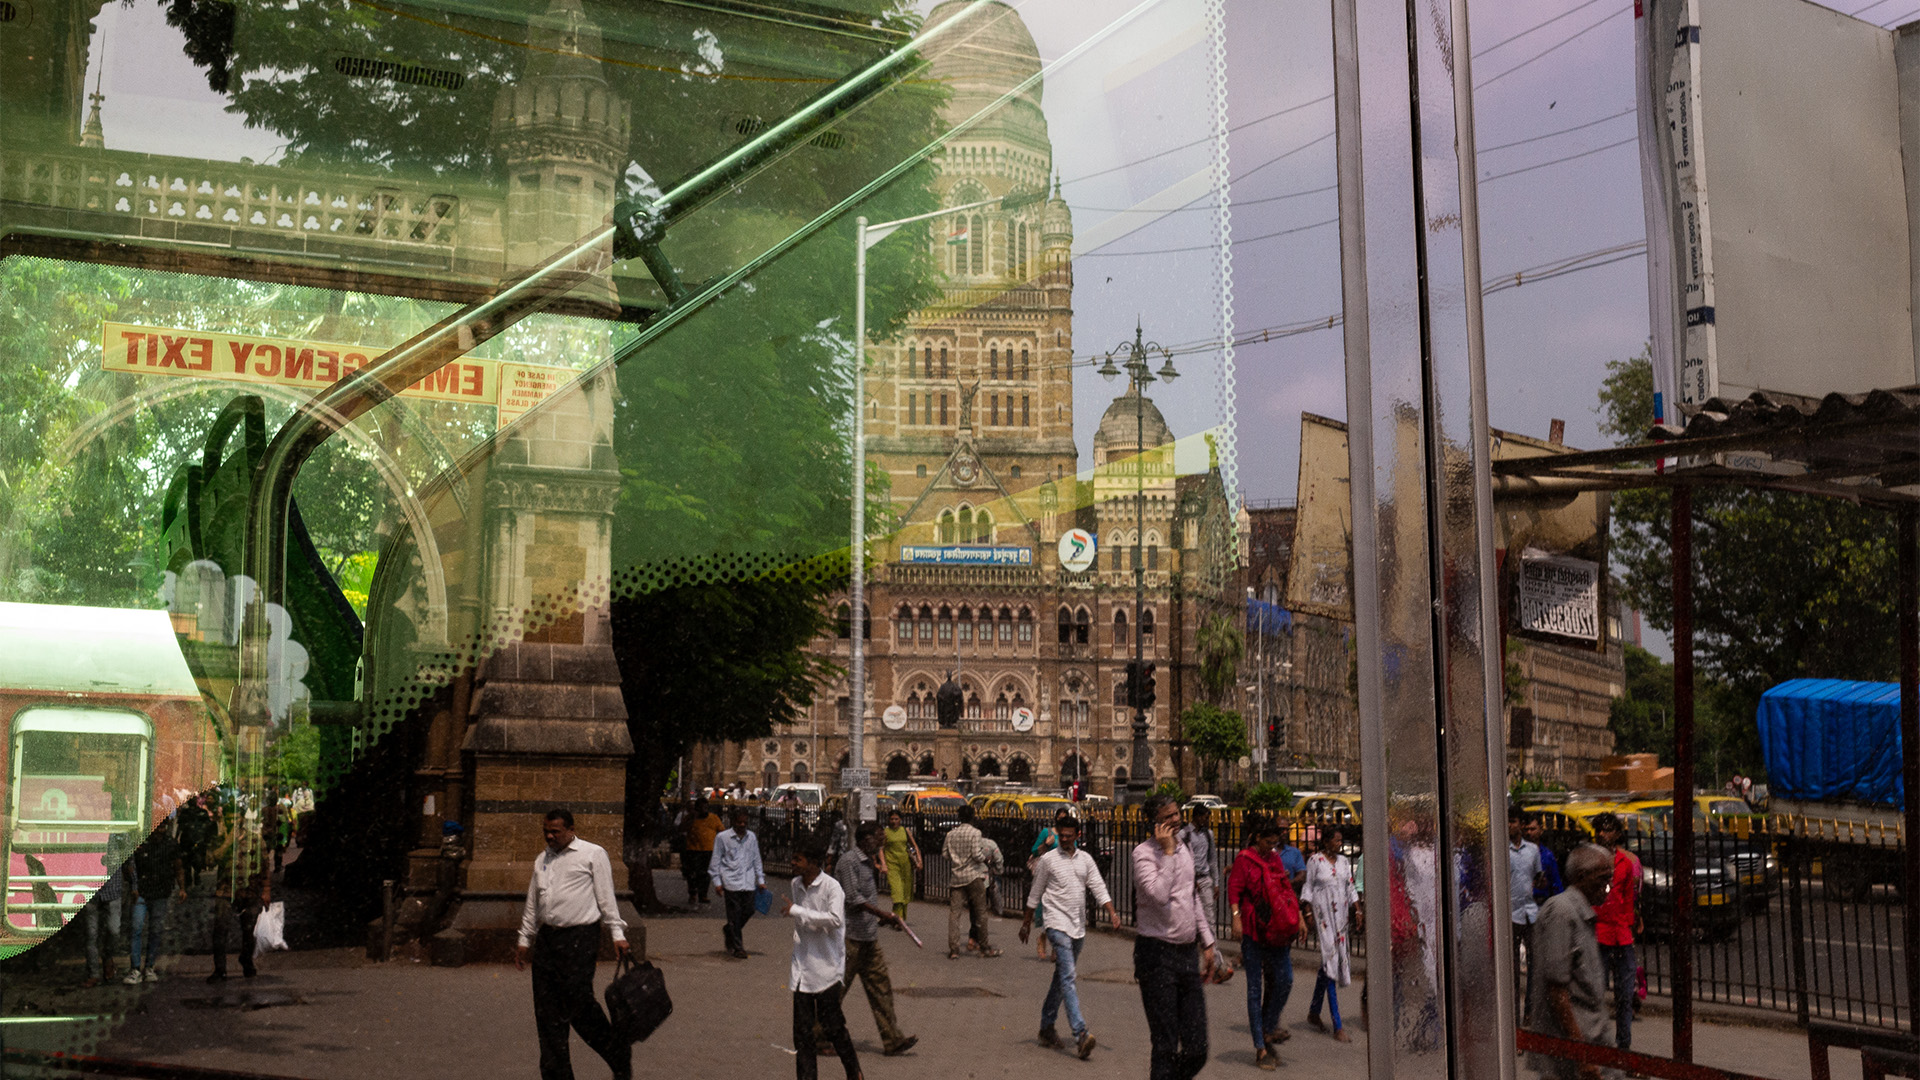 Refection of Mumbai in a window